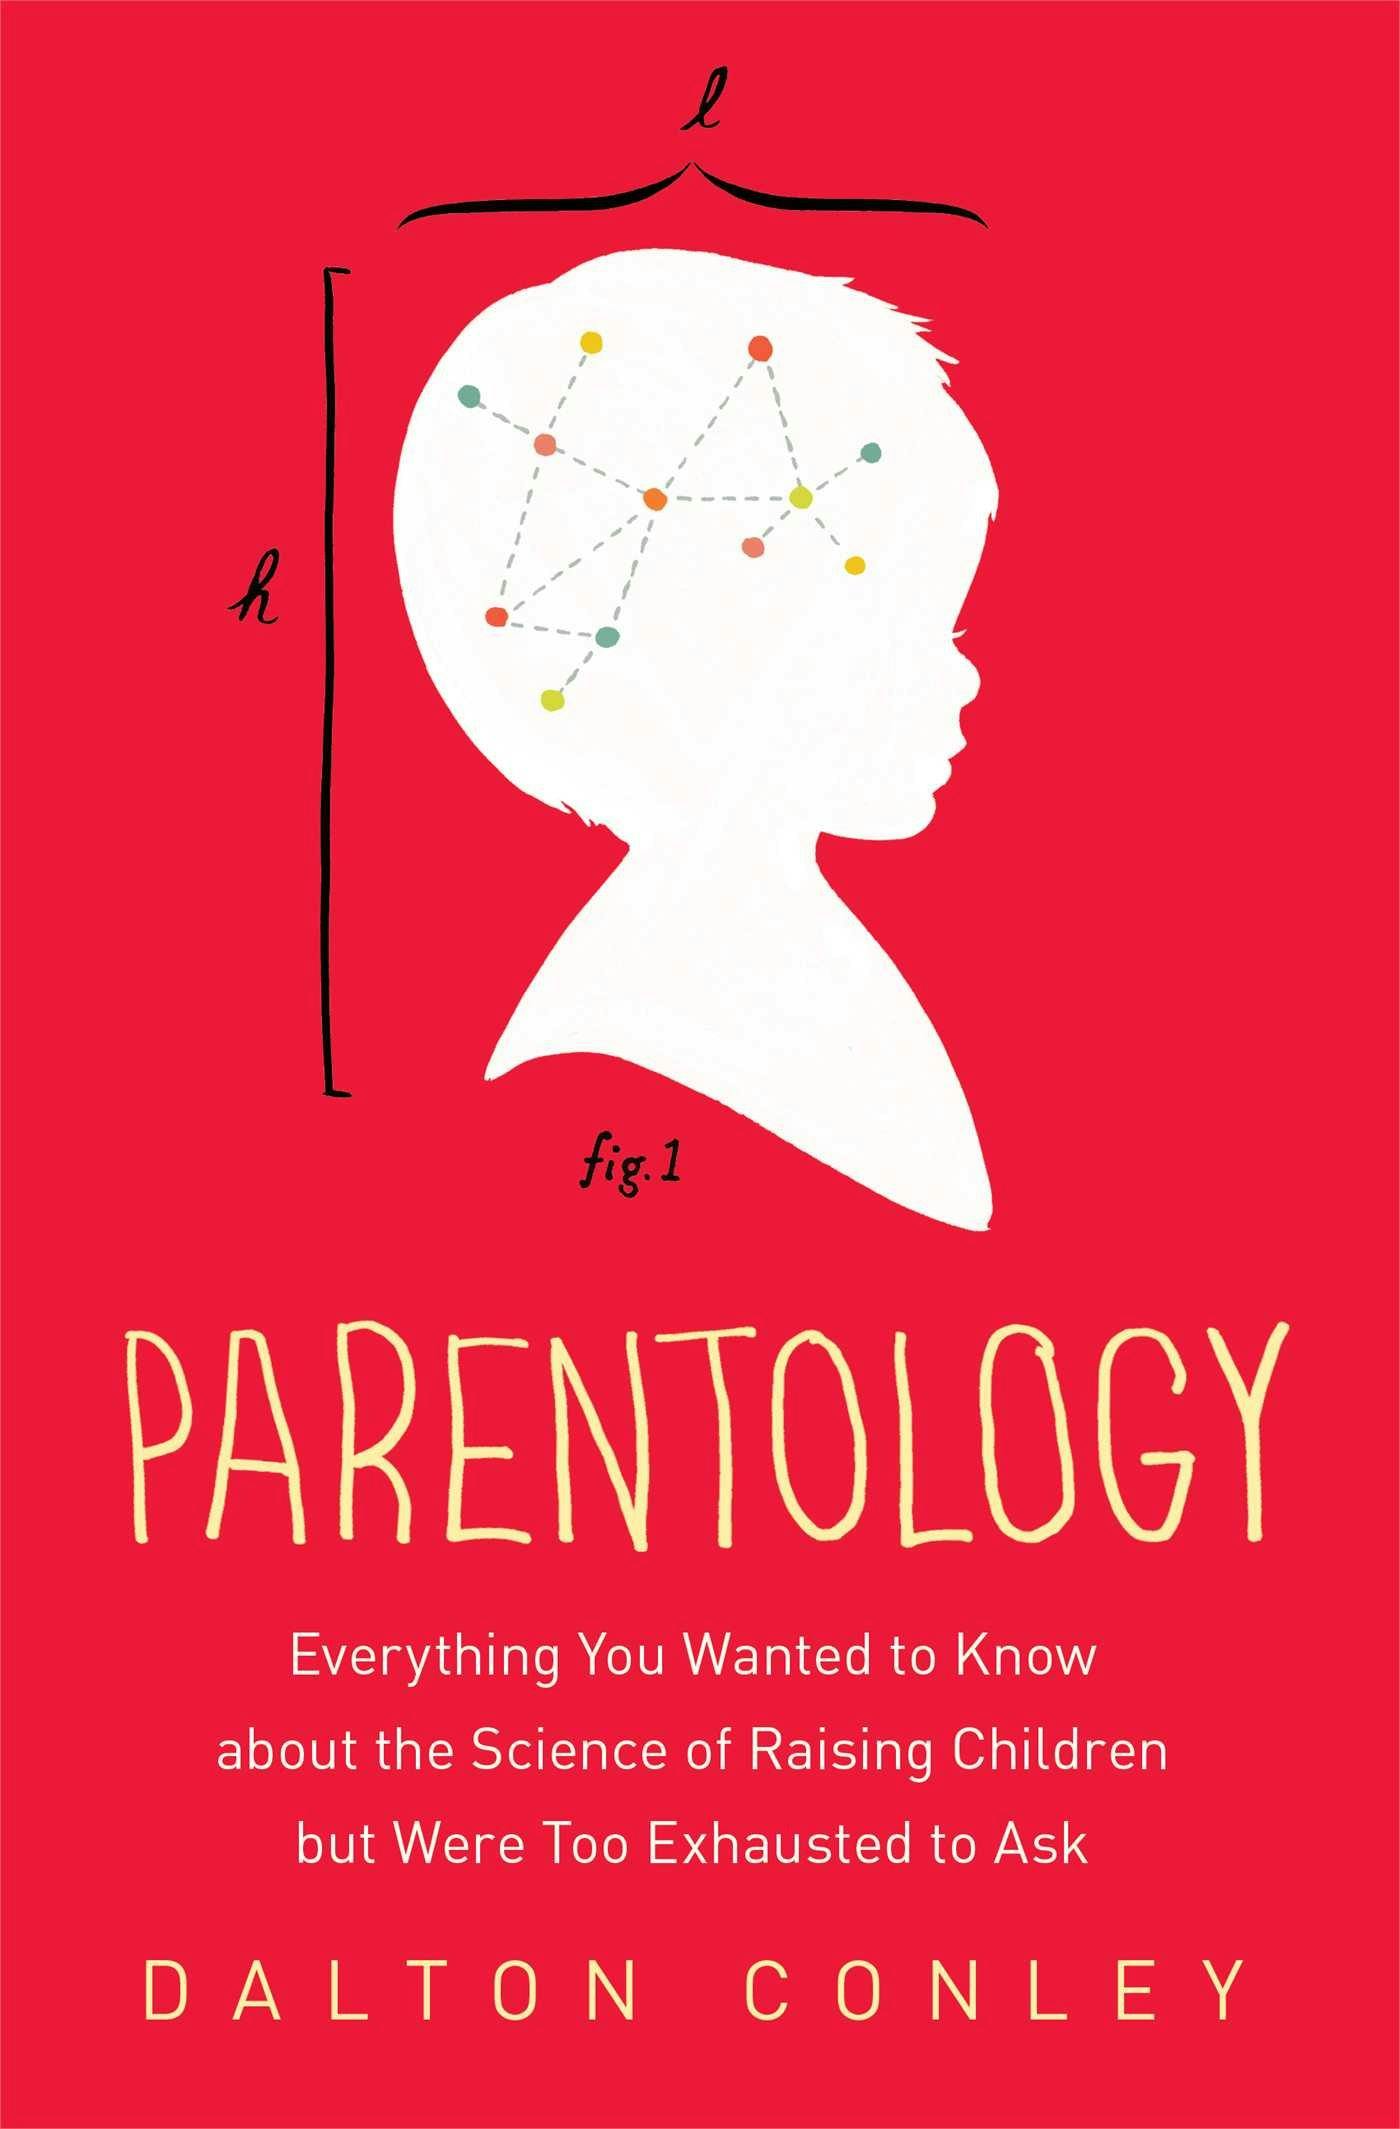 Parentology: What’s not in a name? E is for…?